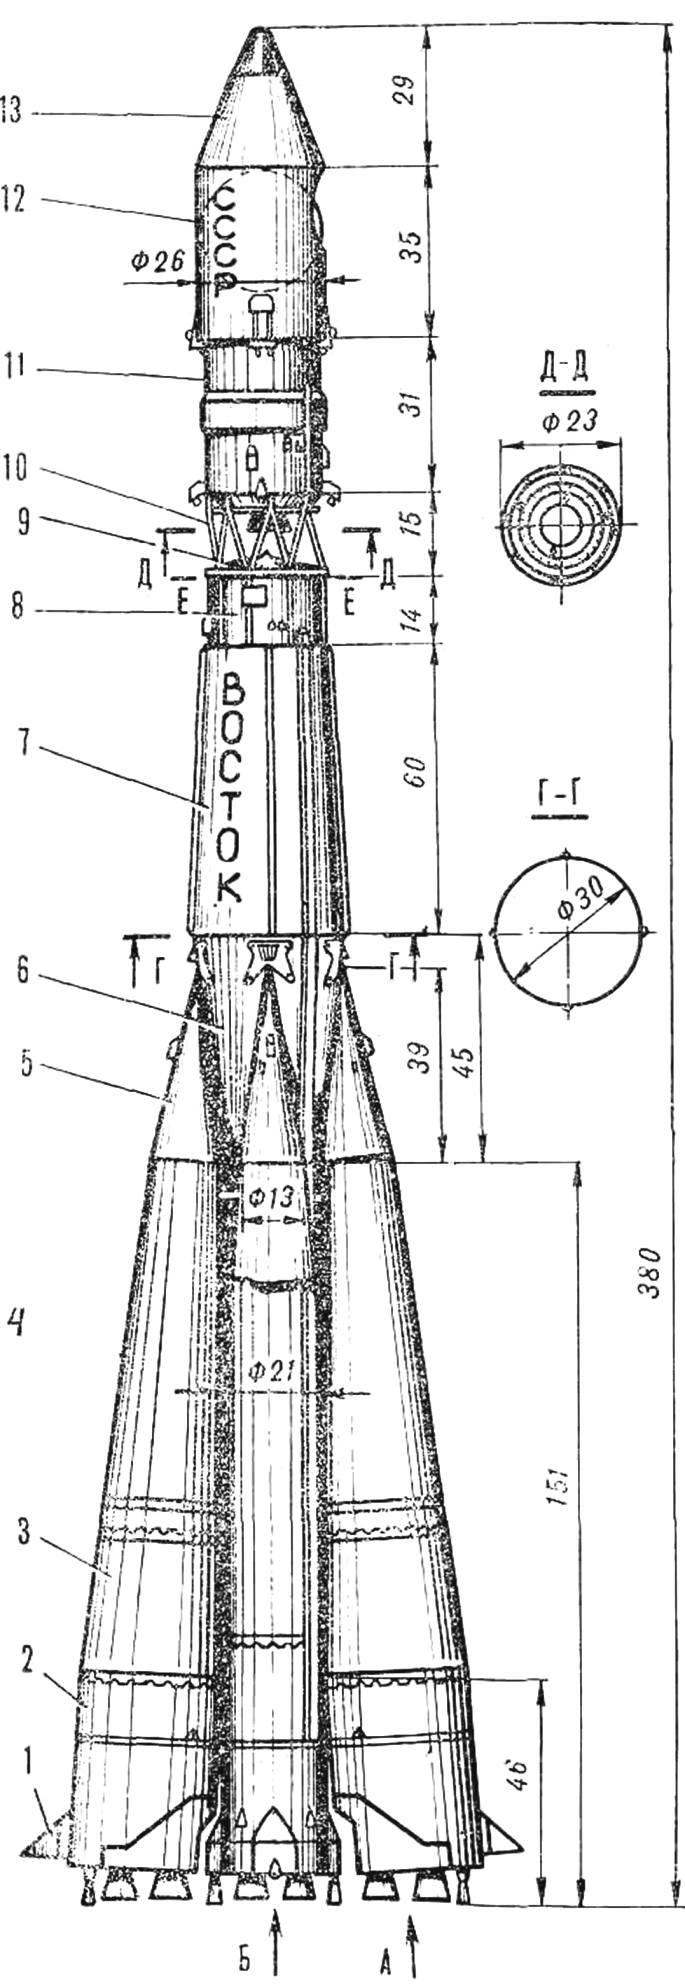 Fig. 1. Model-a copy of the carrier rocket of the spacecraft 